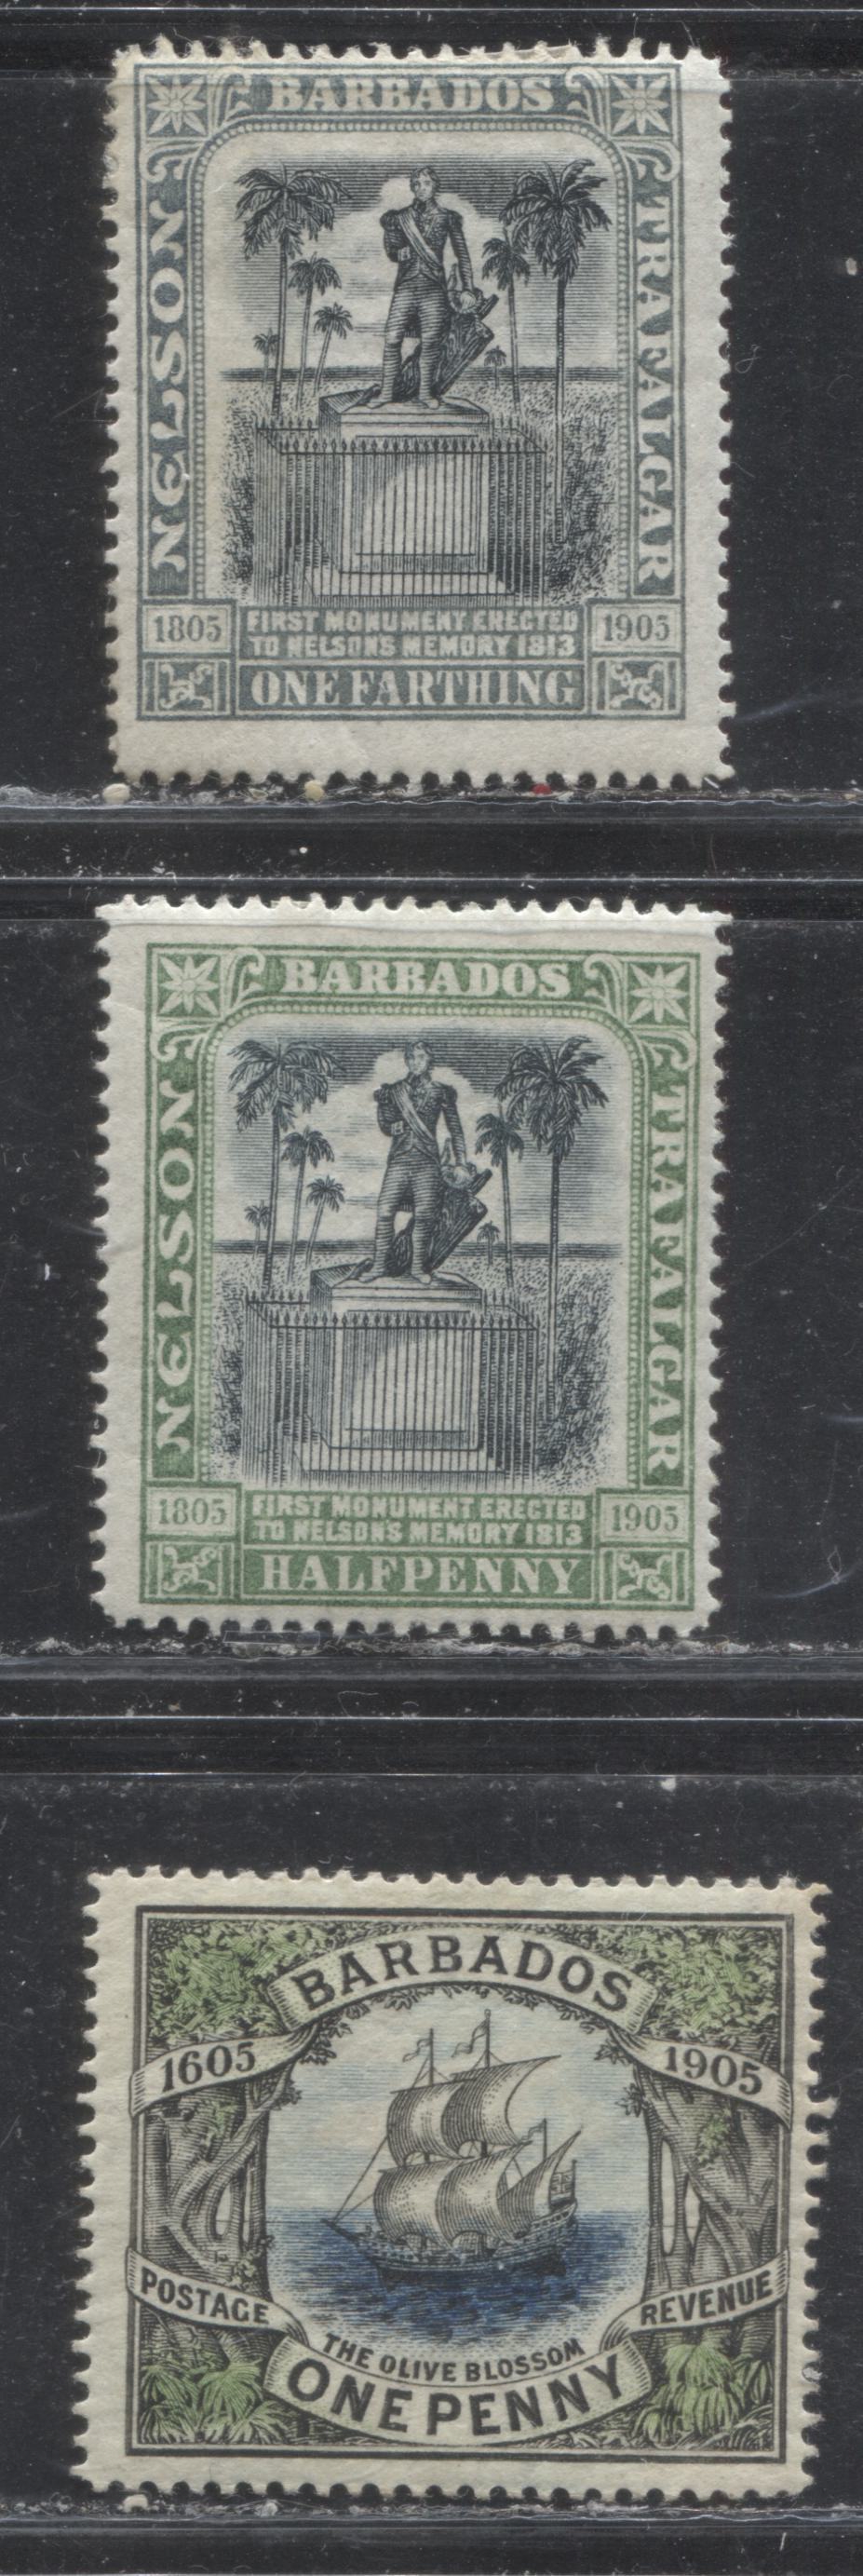 Lot 236 Barbados SG#145-146 1/4d - 1d Grey & Black - Blue, Green & Black Nelson Statue & Olive Blossom, 1906 Nelson Centenary & Tercentenary Issues, 3 Fine OG Singles, Crown CC and Multiple Crown CA Watermarks